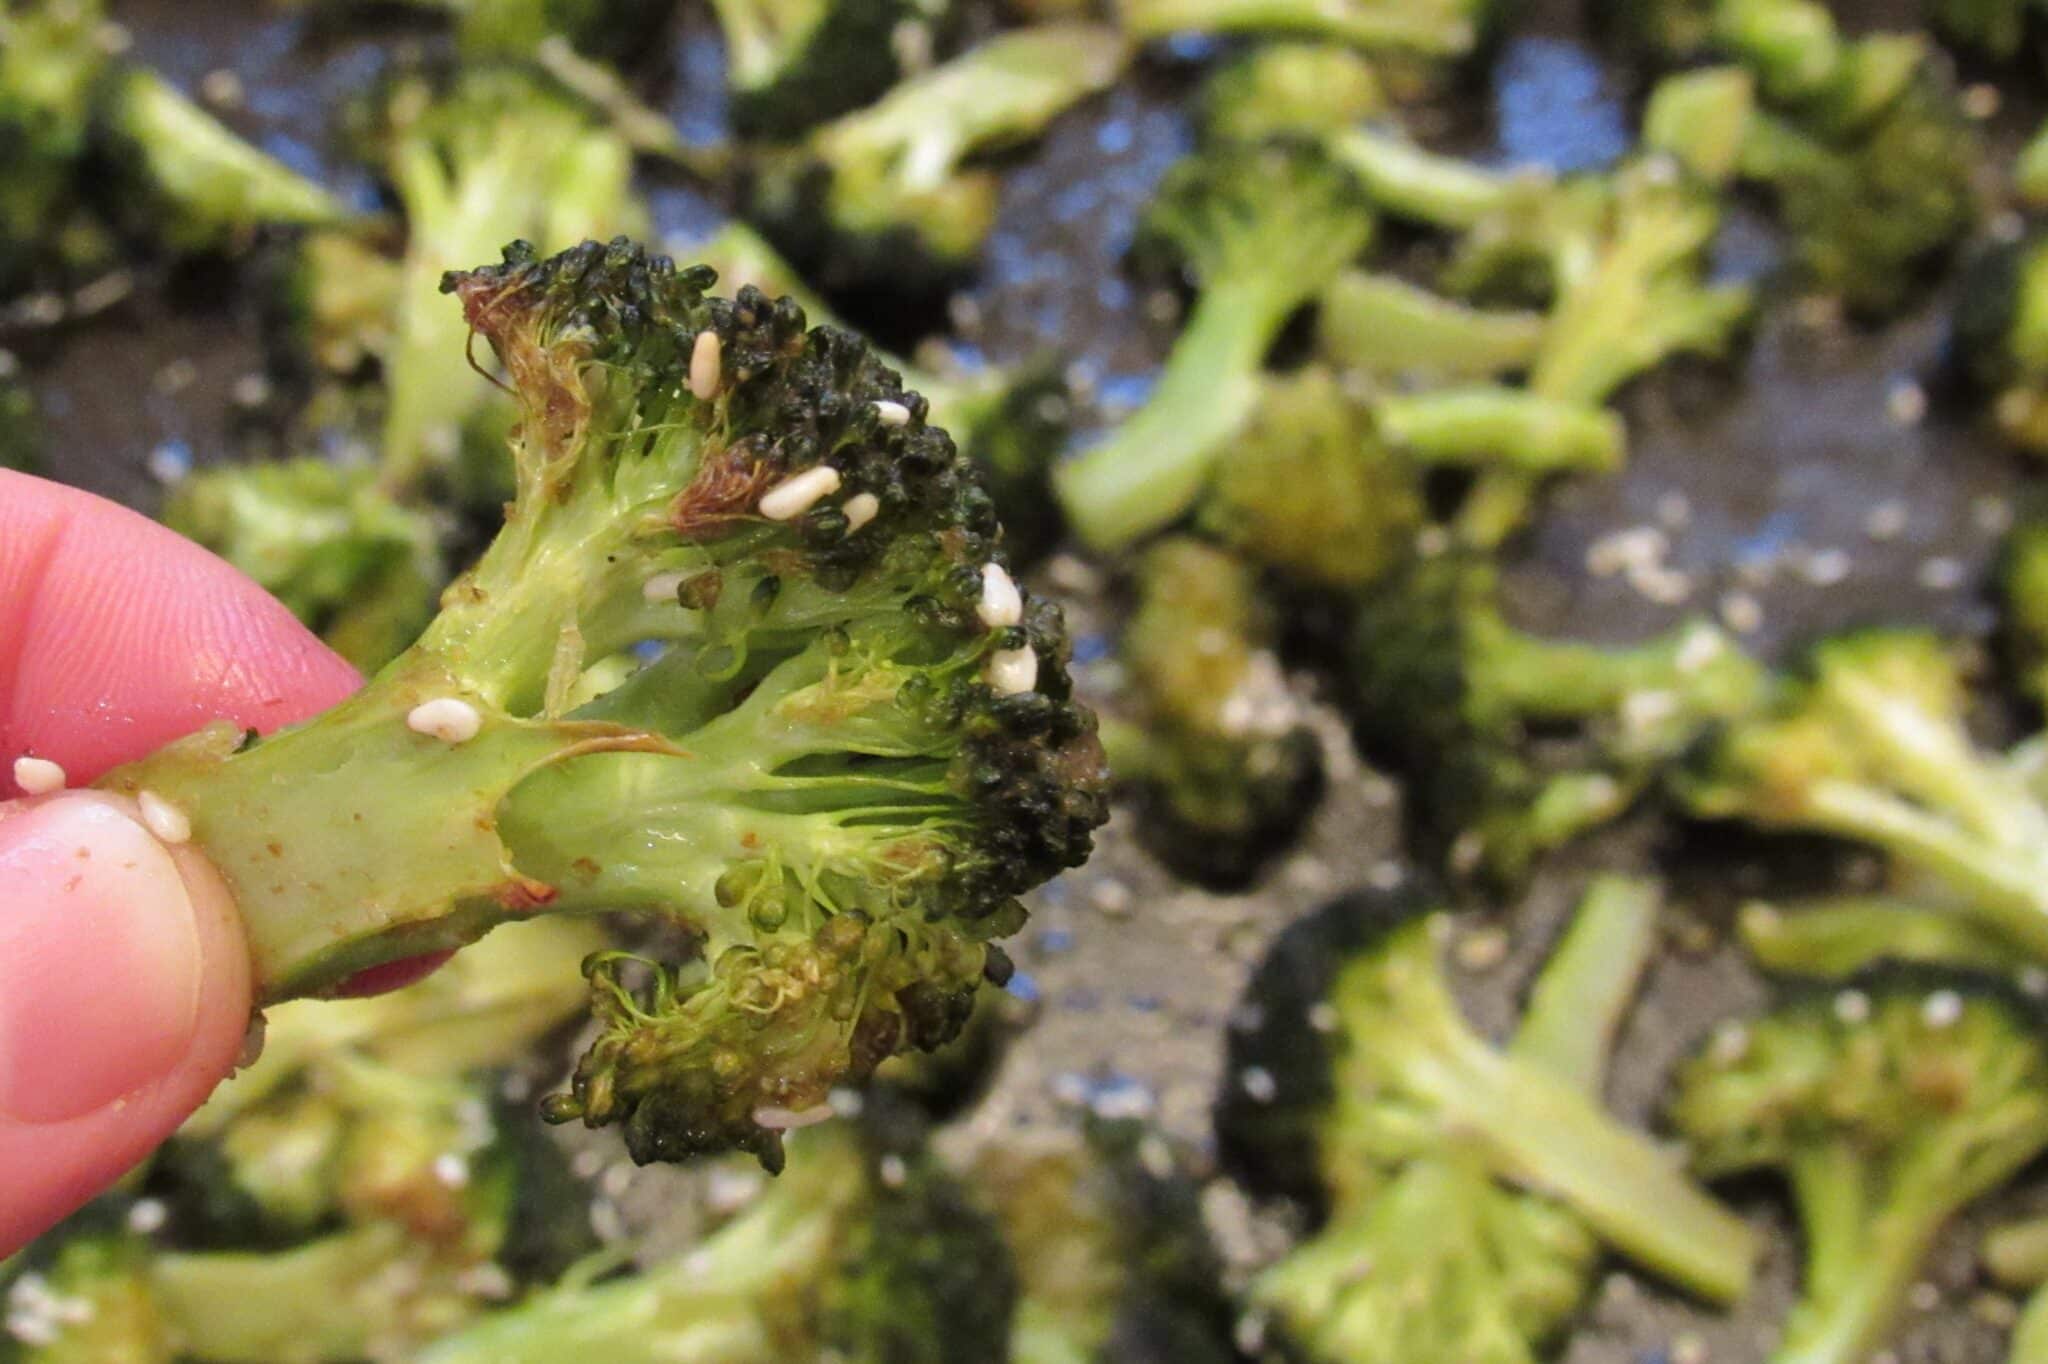 A hand is holding a piece of roasted broccoli.